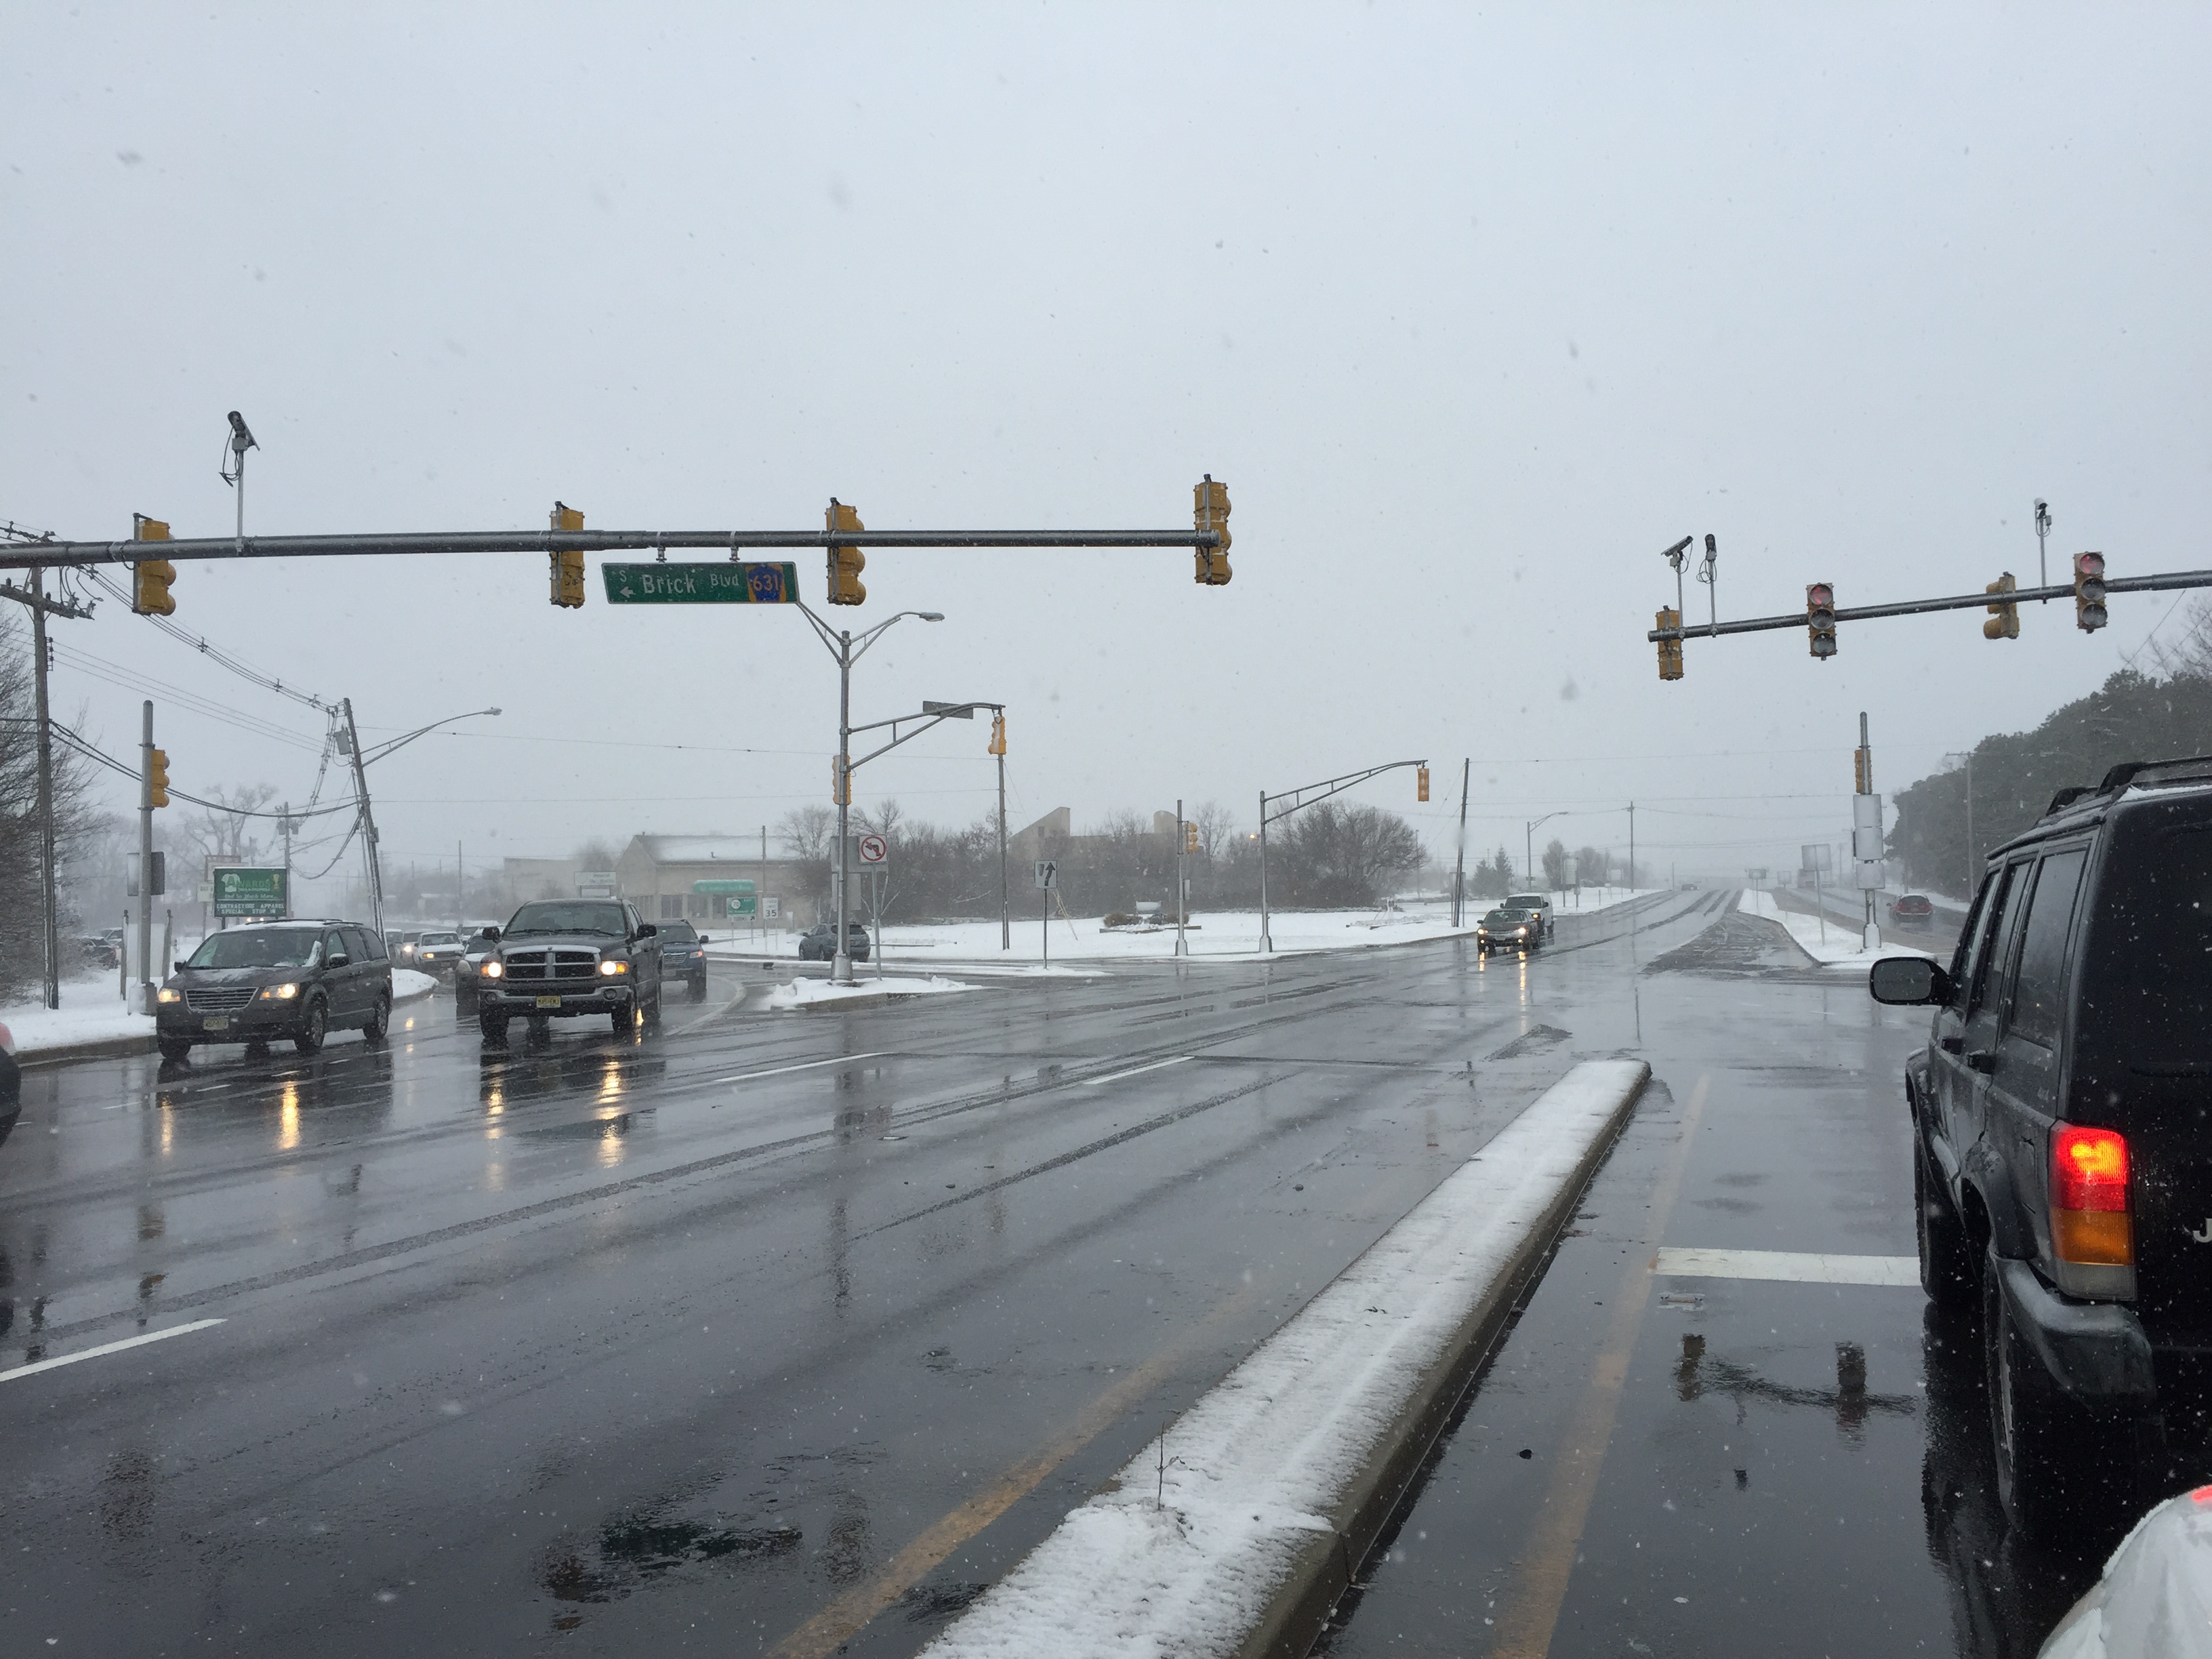 The intersection of Route 70 and Brick Boulevard, just after 12 noon, Monday, Jan. 26, 2015. (Photo: Daniel Nee)